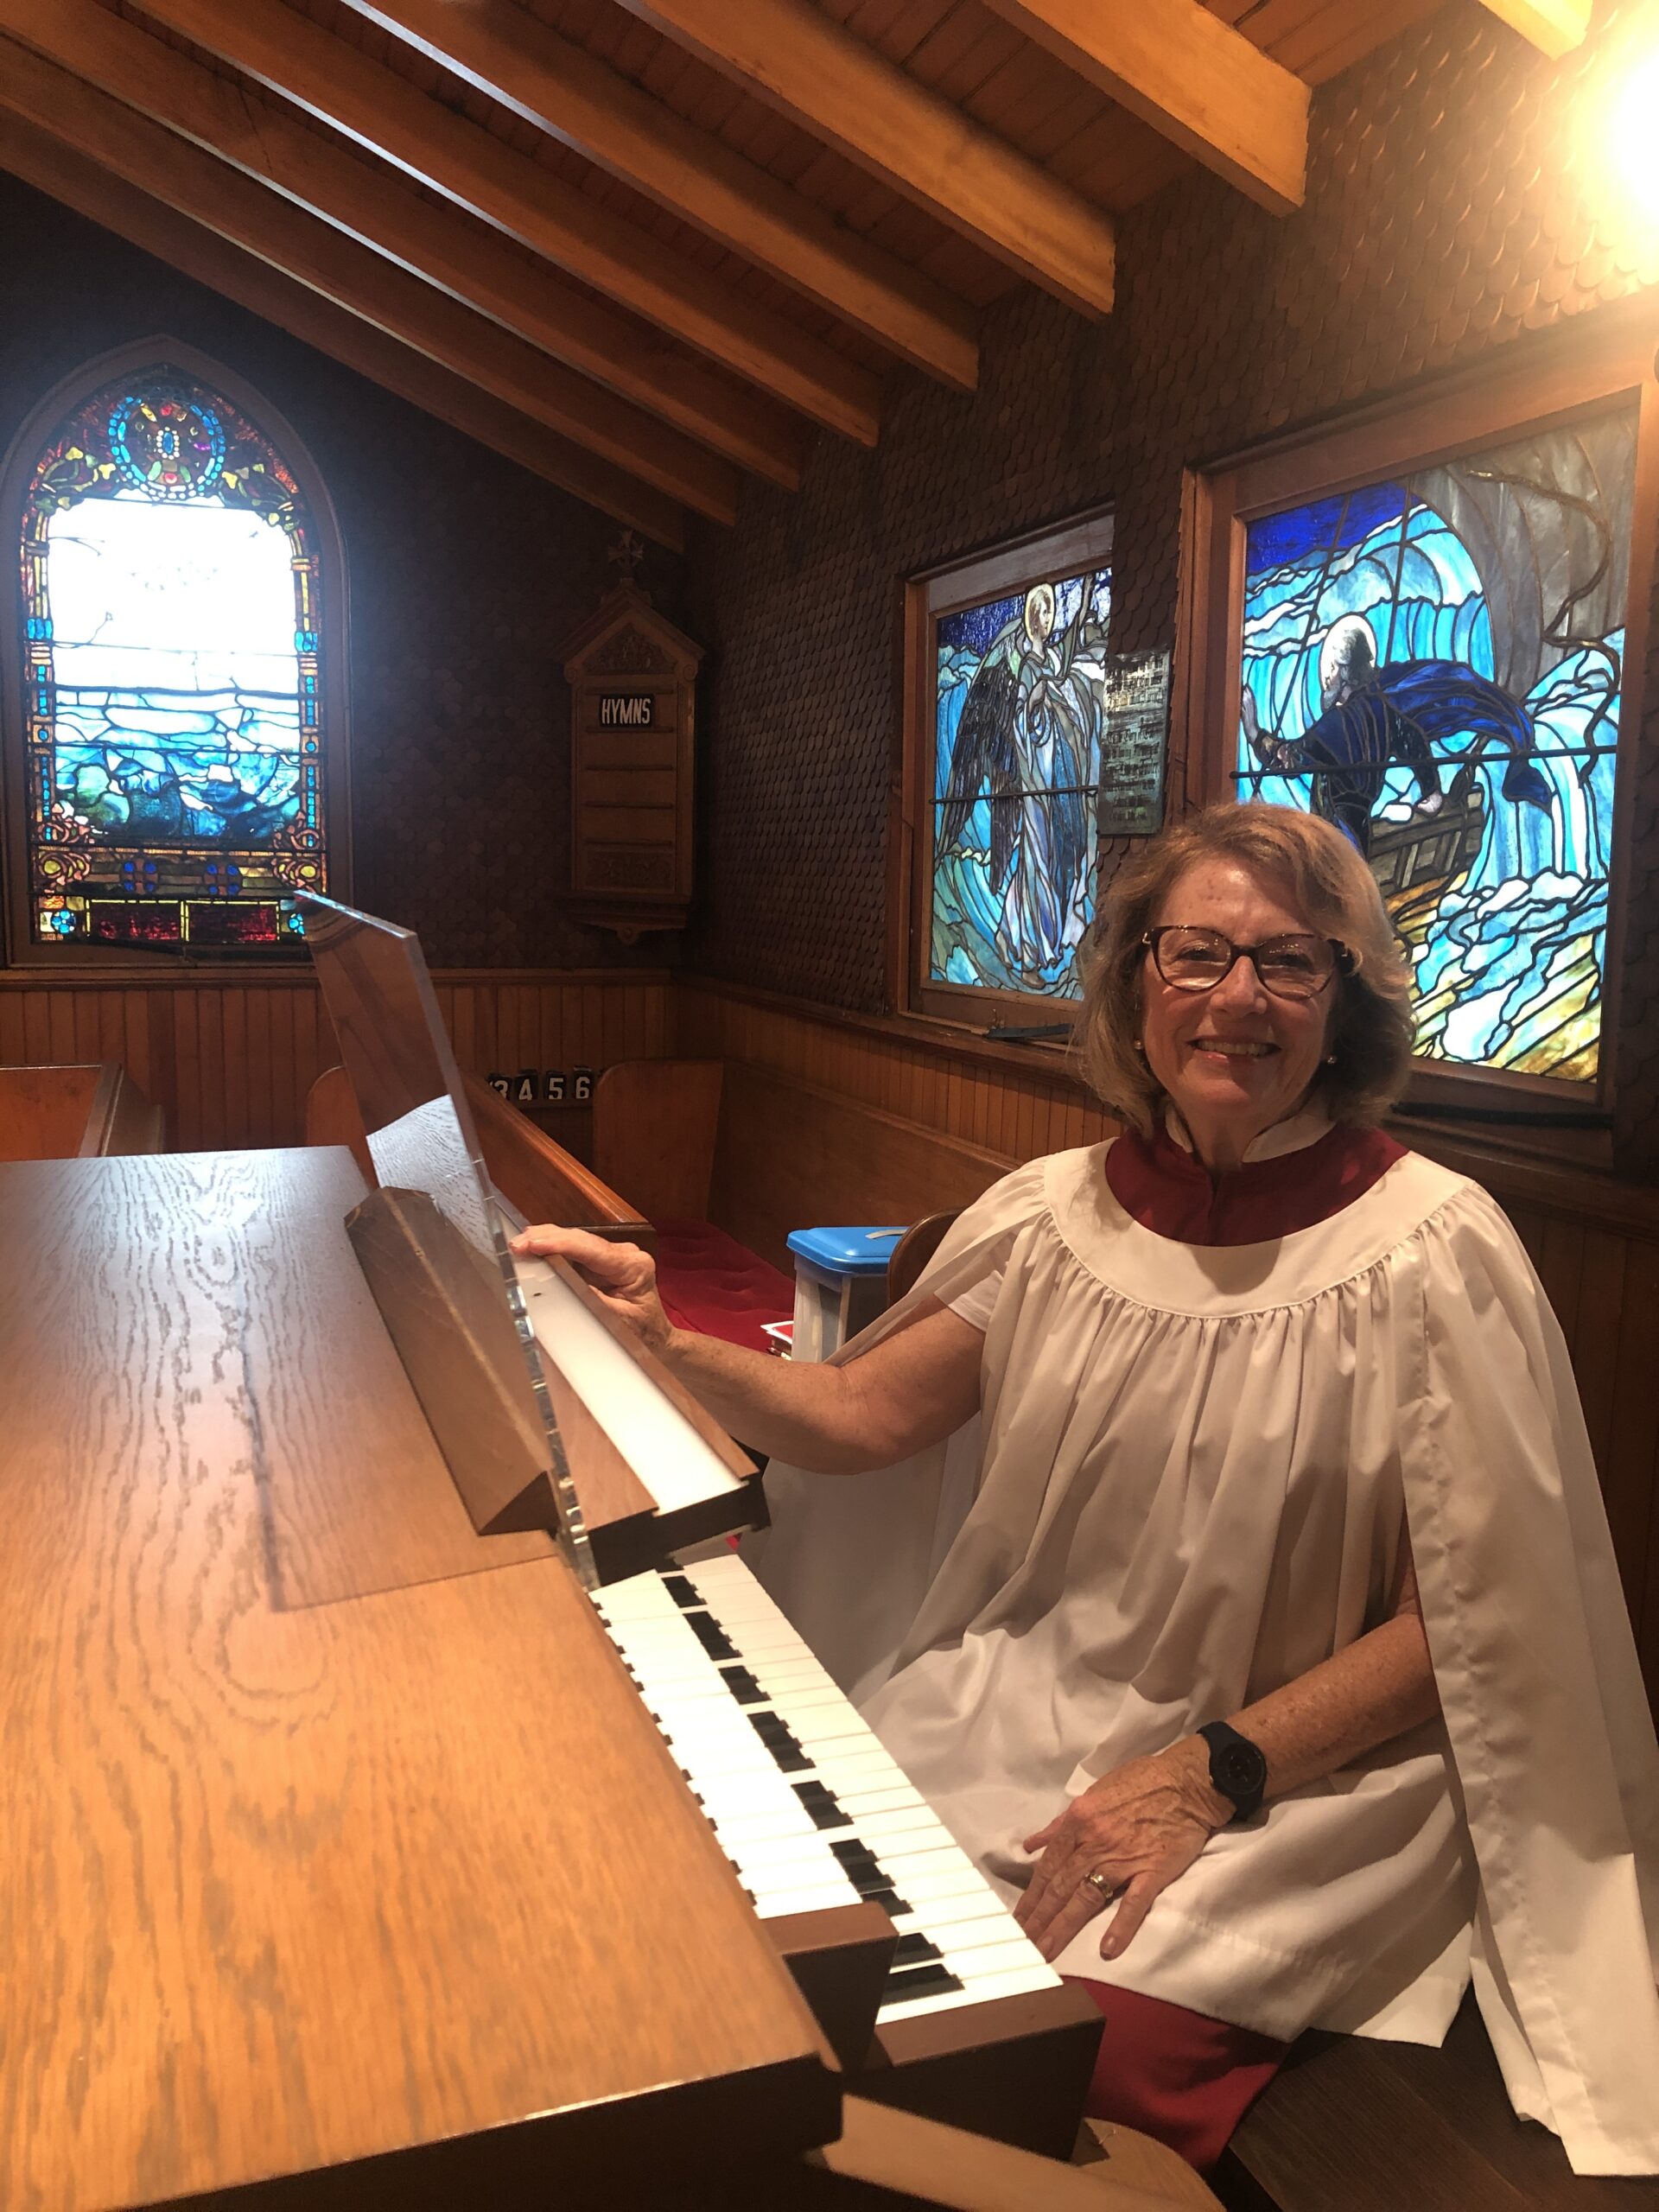 Tricia Feiler has been the children's choir director and organist at the Church of the Atonement in Quogue for 50 years. This is her last summer. CAILIN RILEY